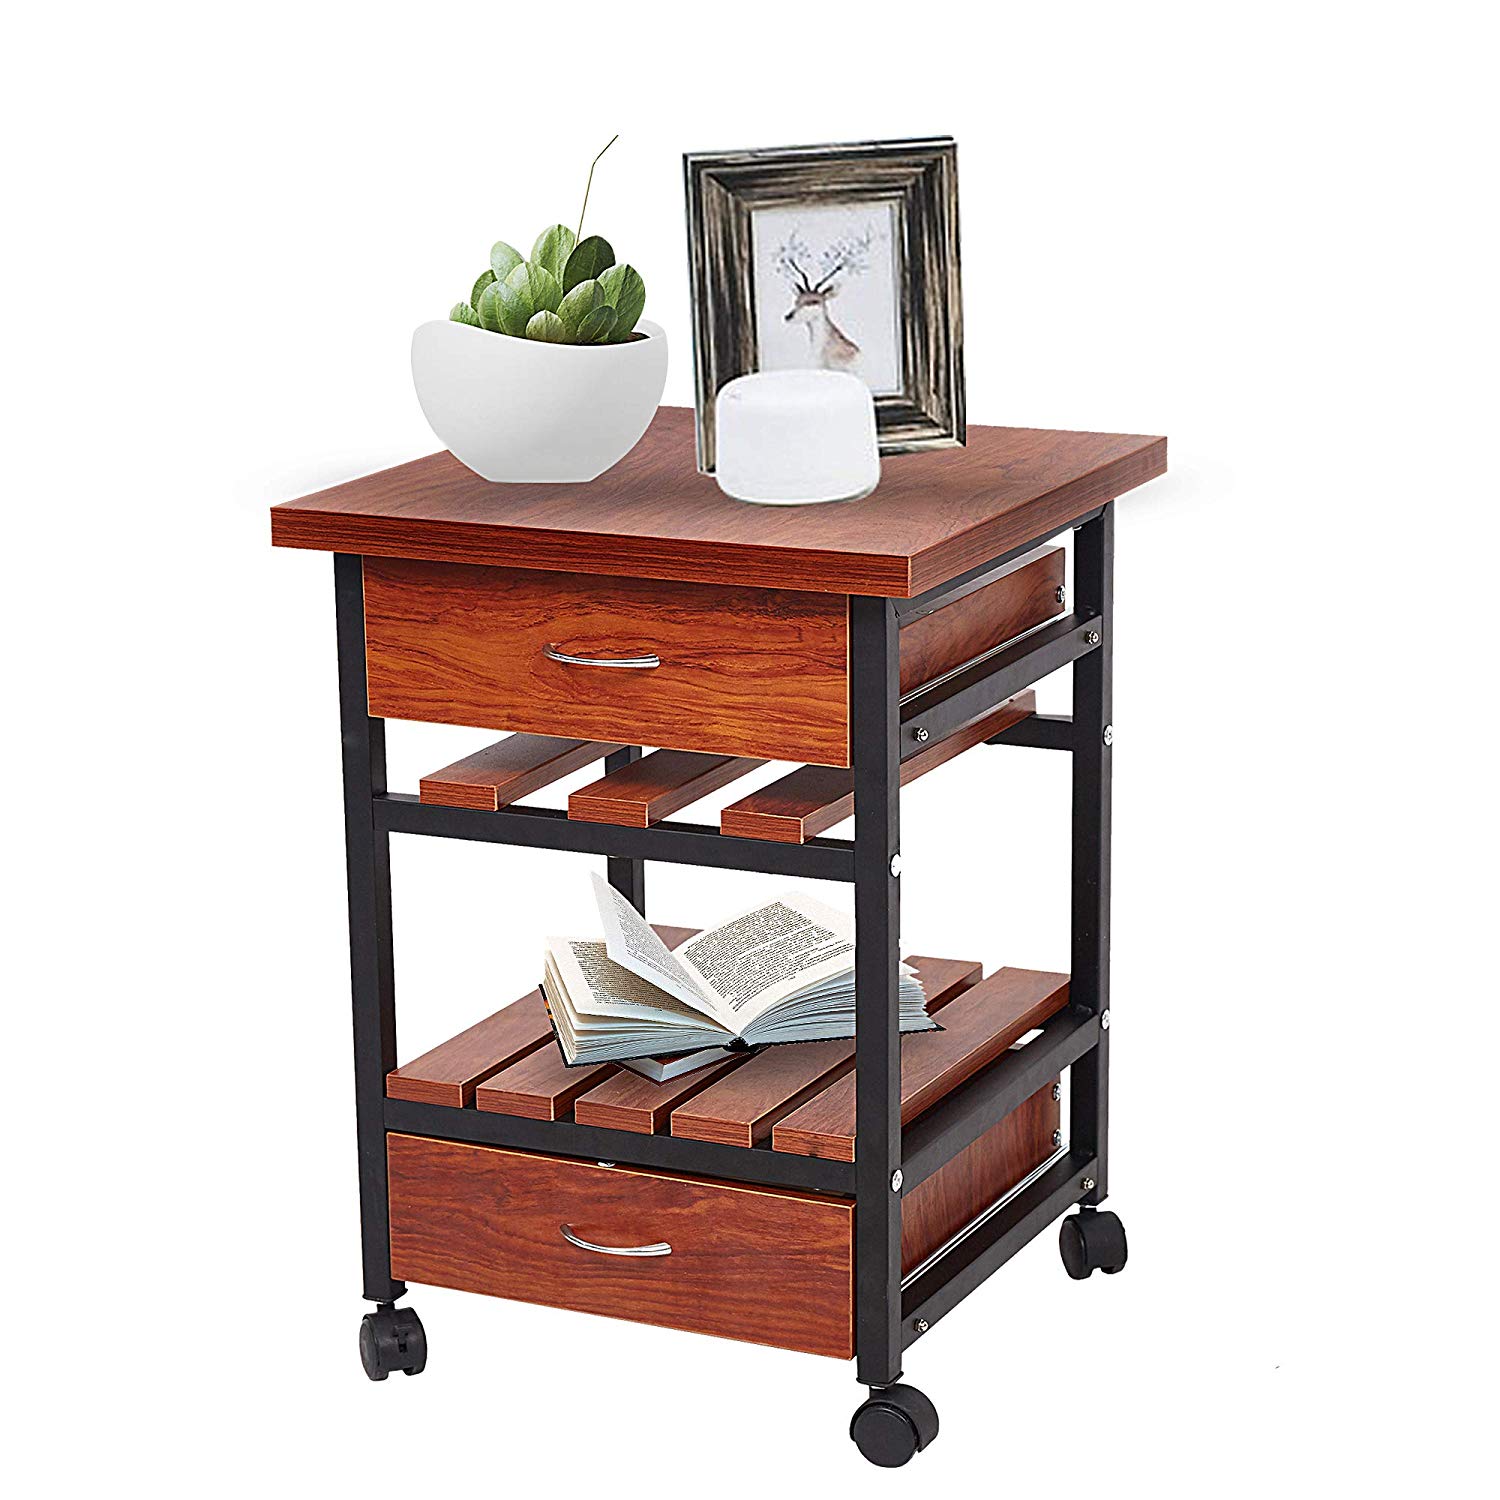 Bosonshop Nightstand Dresser Storage Organizer Unit with 2 Drawers for Bedroom Living Room